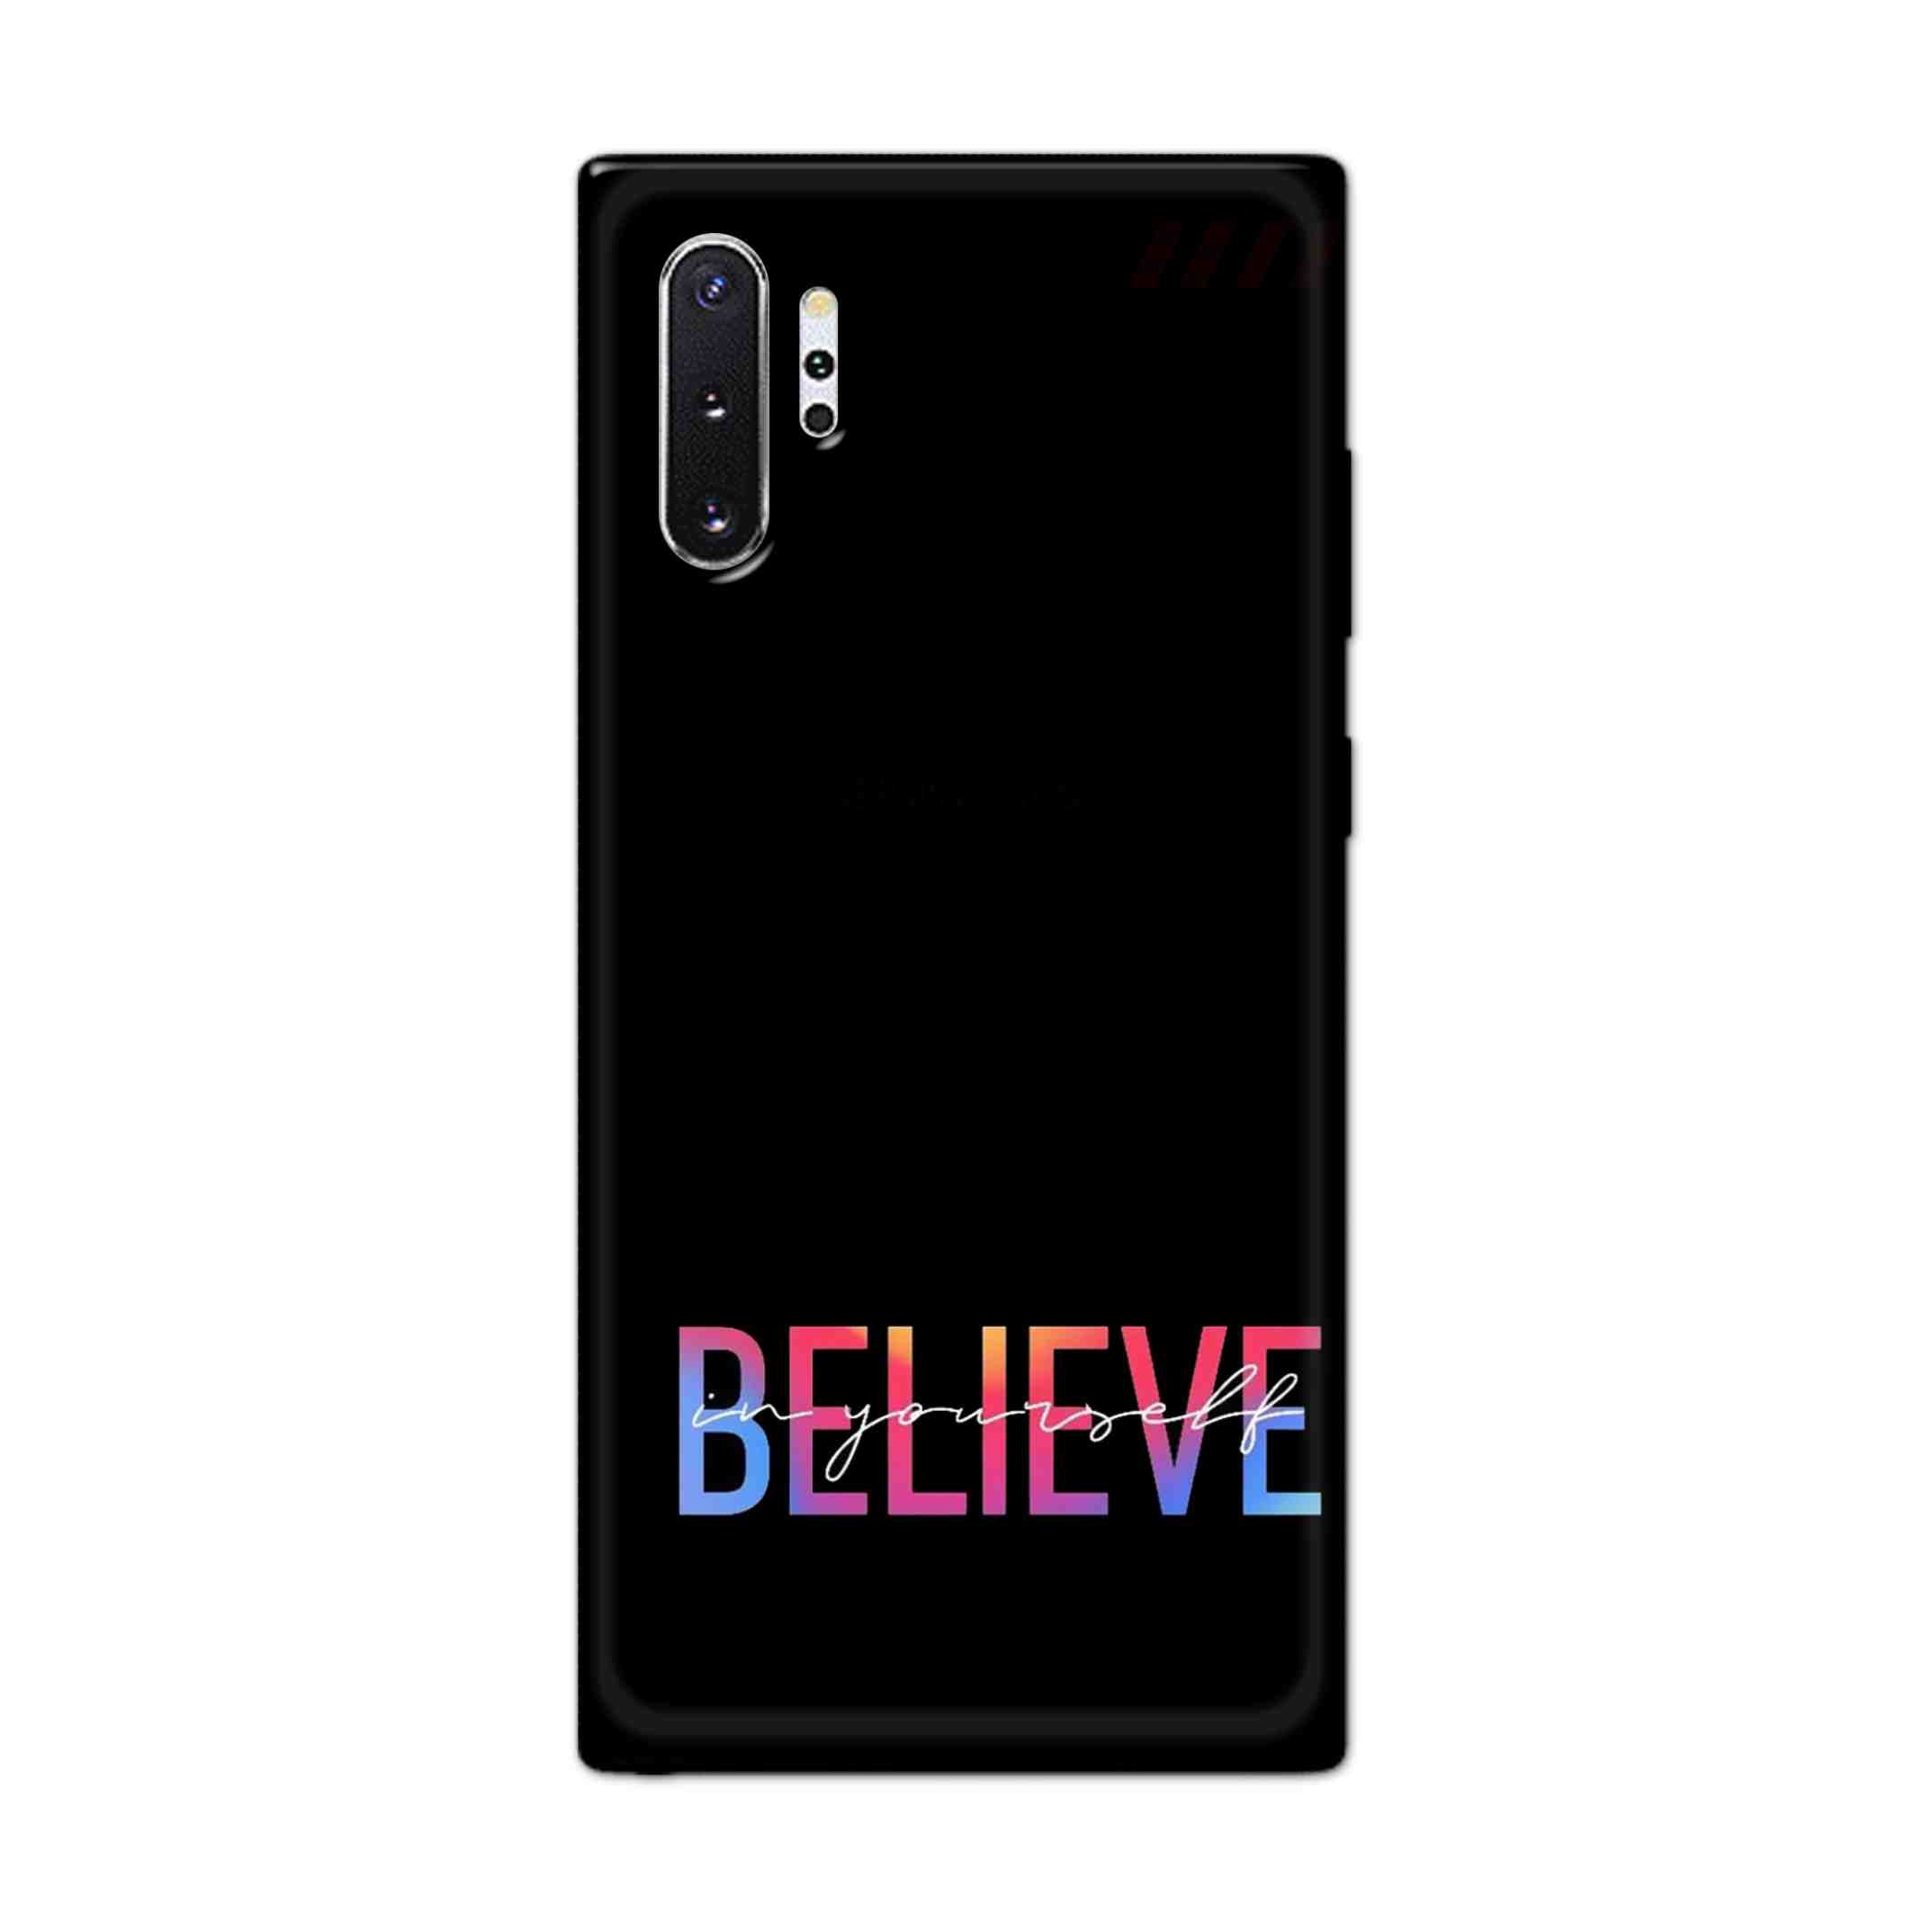 Buy Believe Hard Back Mobile Phone Case Cover For Samsung Note 10 Plus (5G) Online